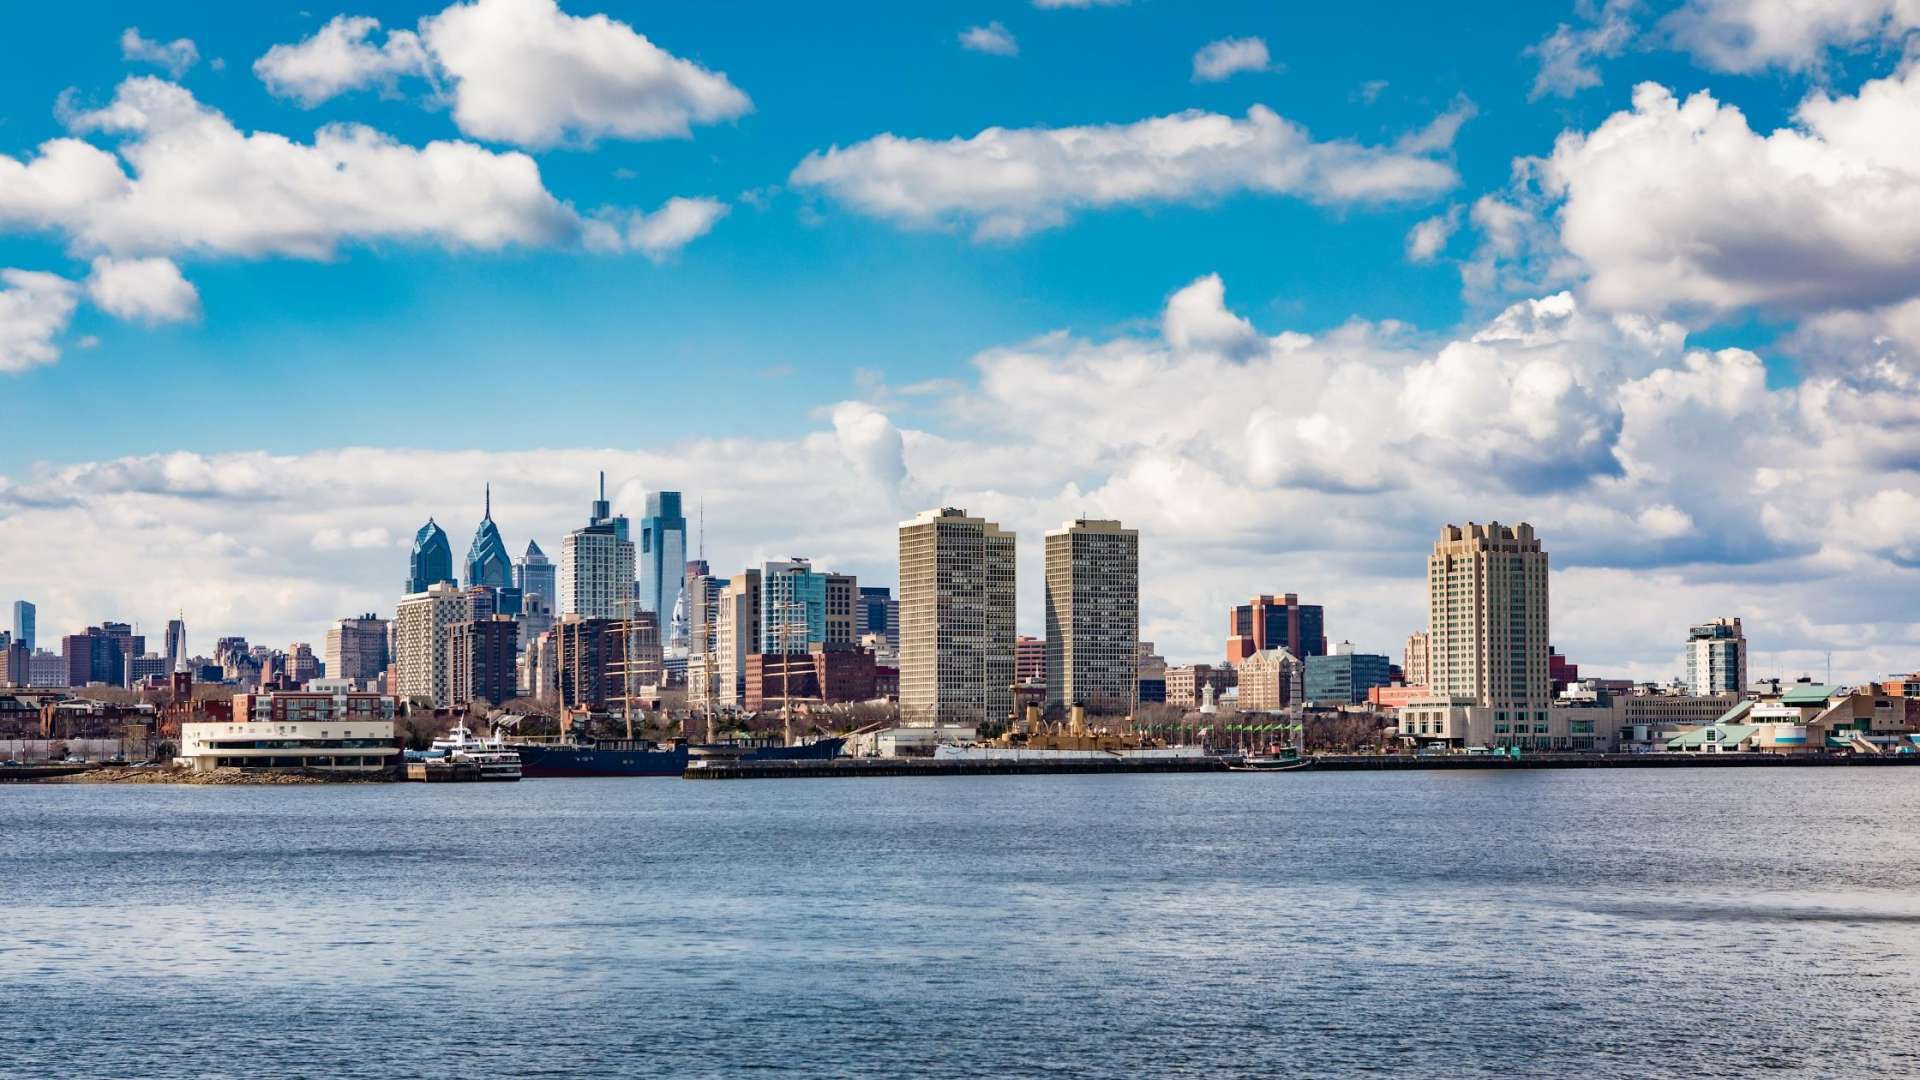 What County is Philadelphia In? view showing center city philadelphia